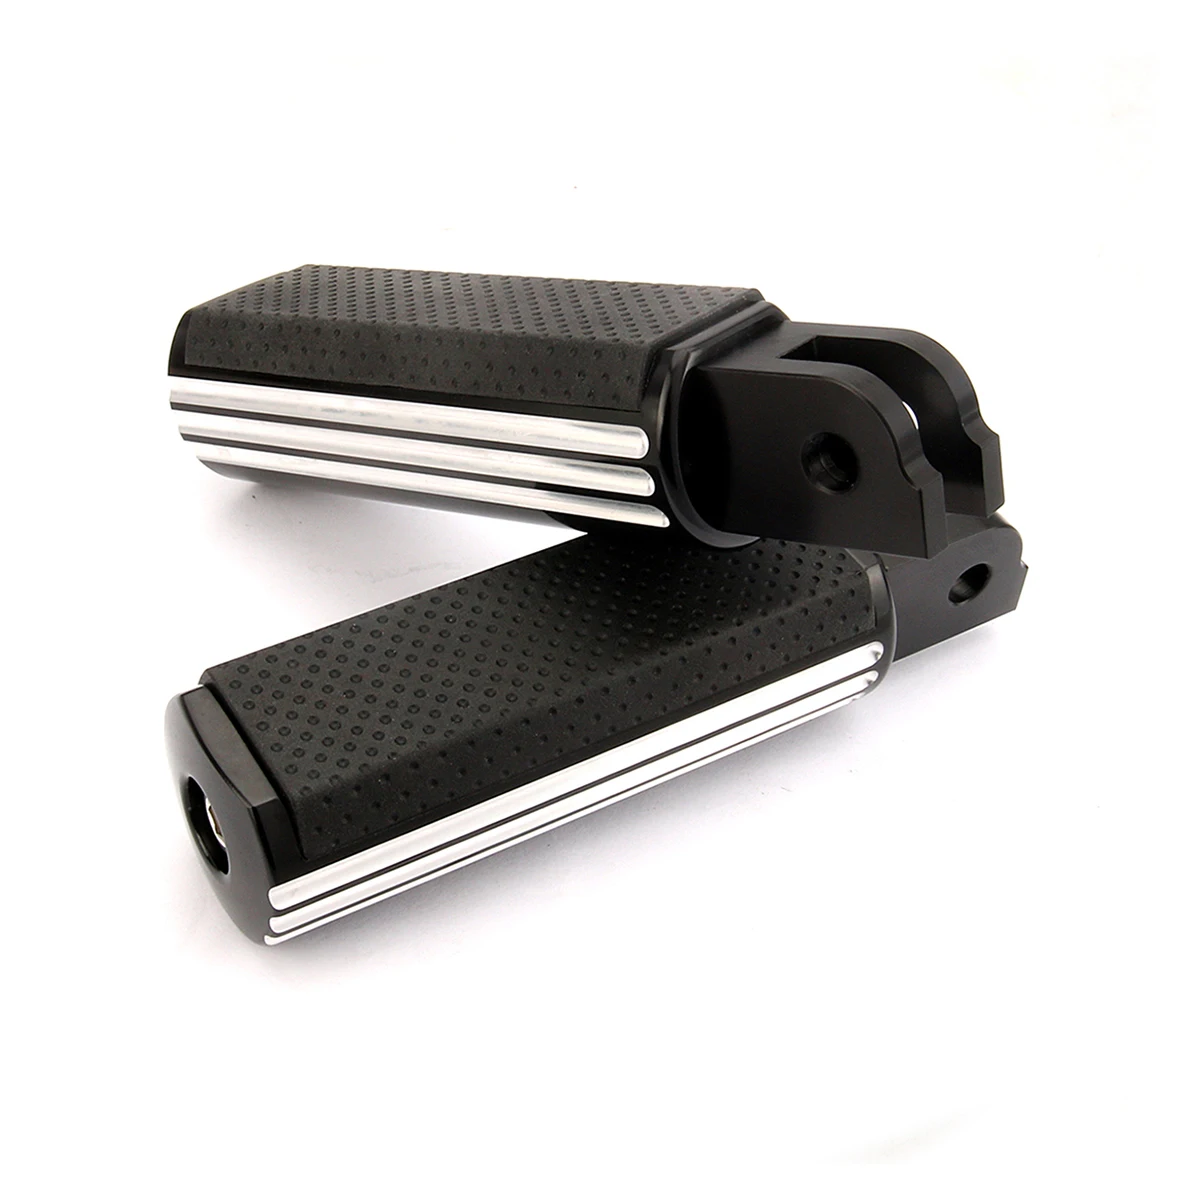 Black Defiance Driver Rider front footpegs for harley Softail Street Bob... - $83.13